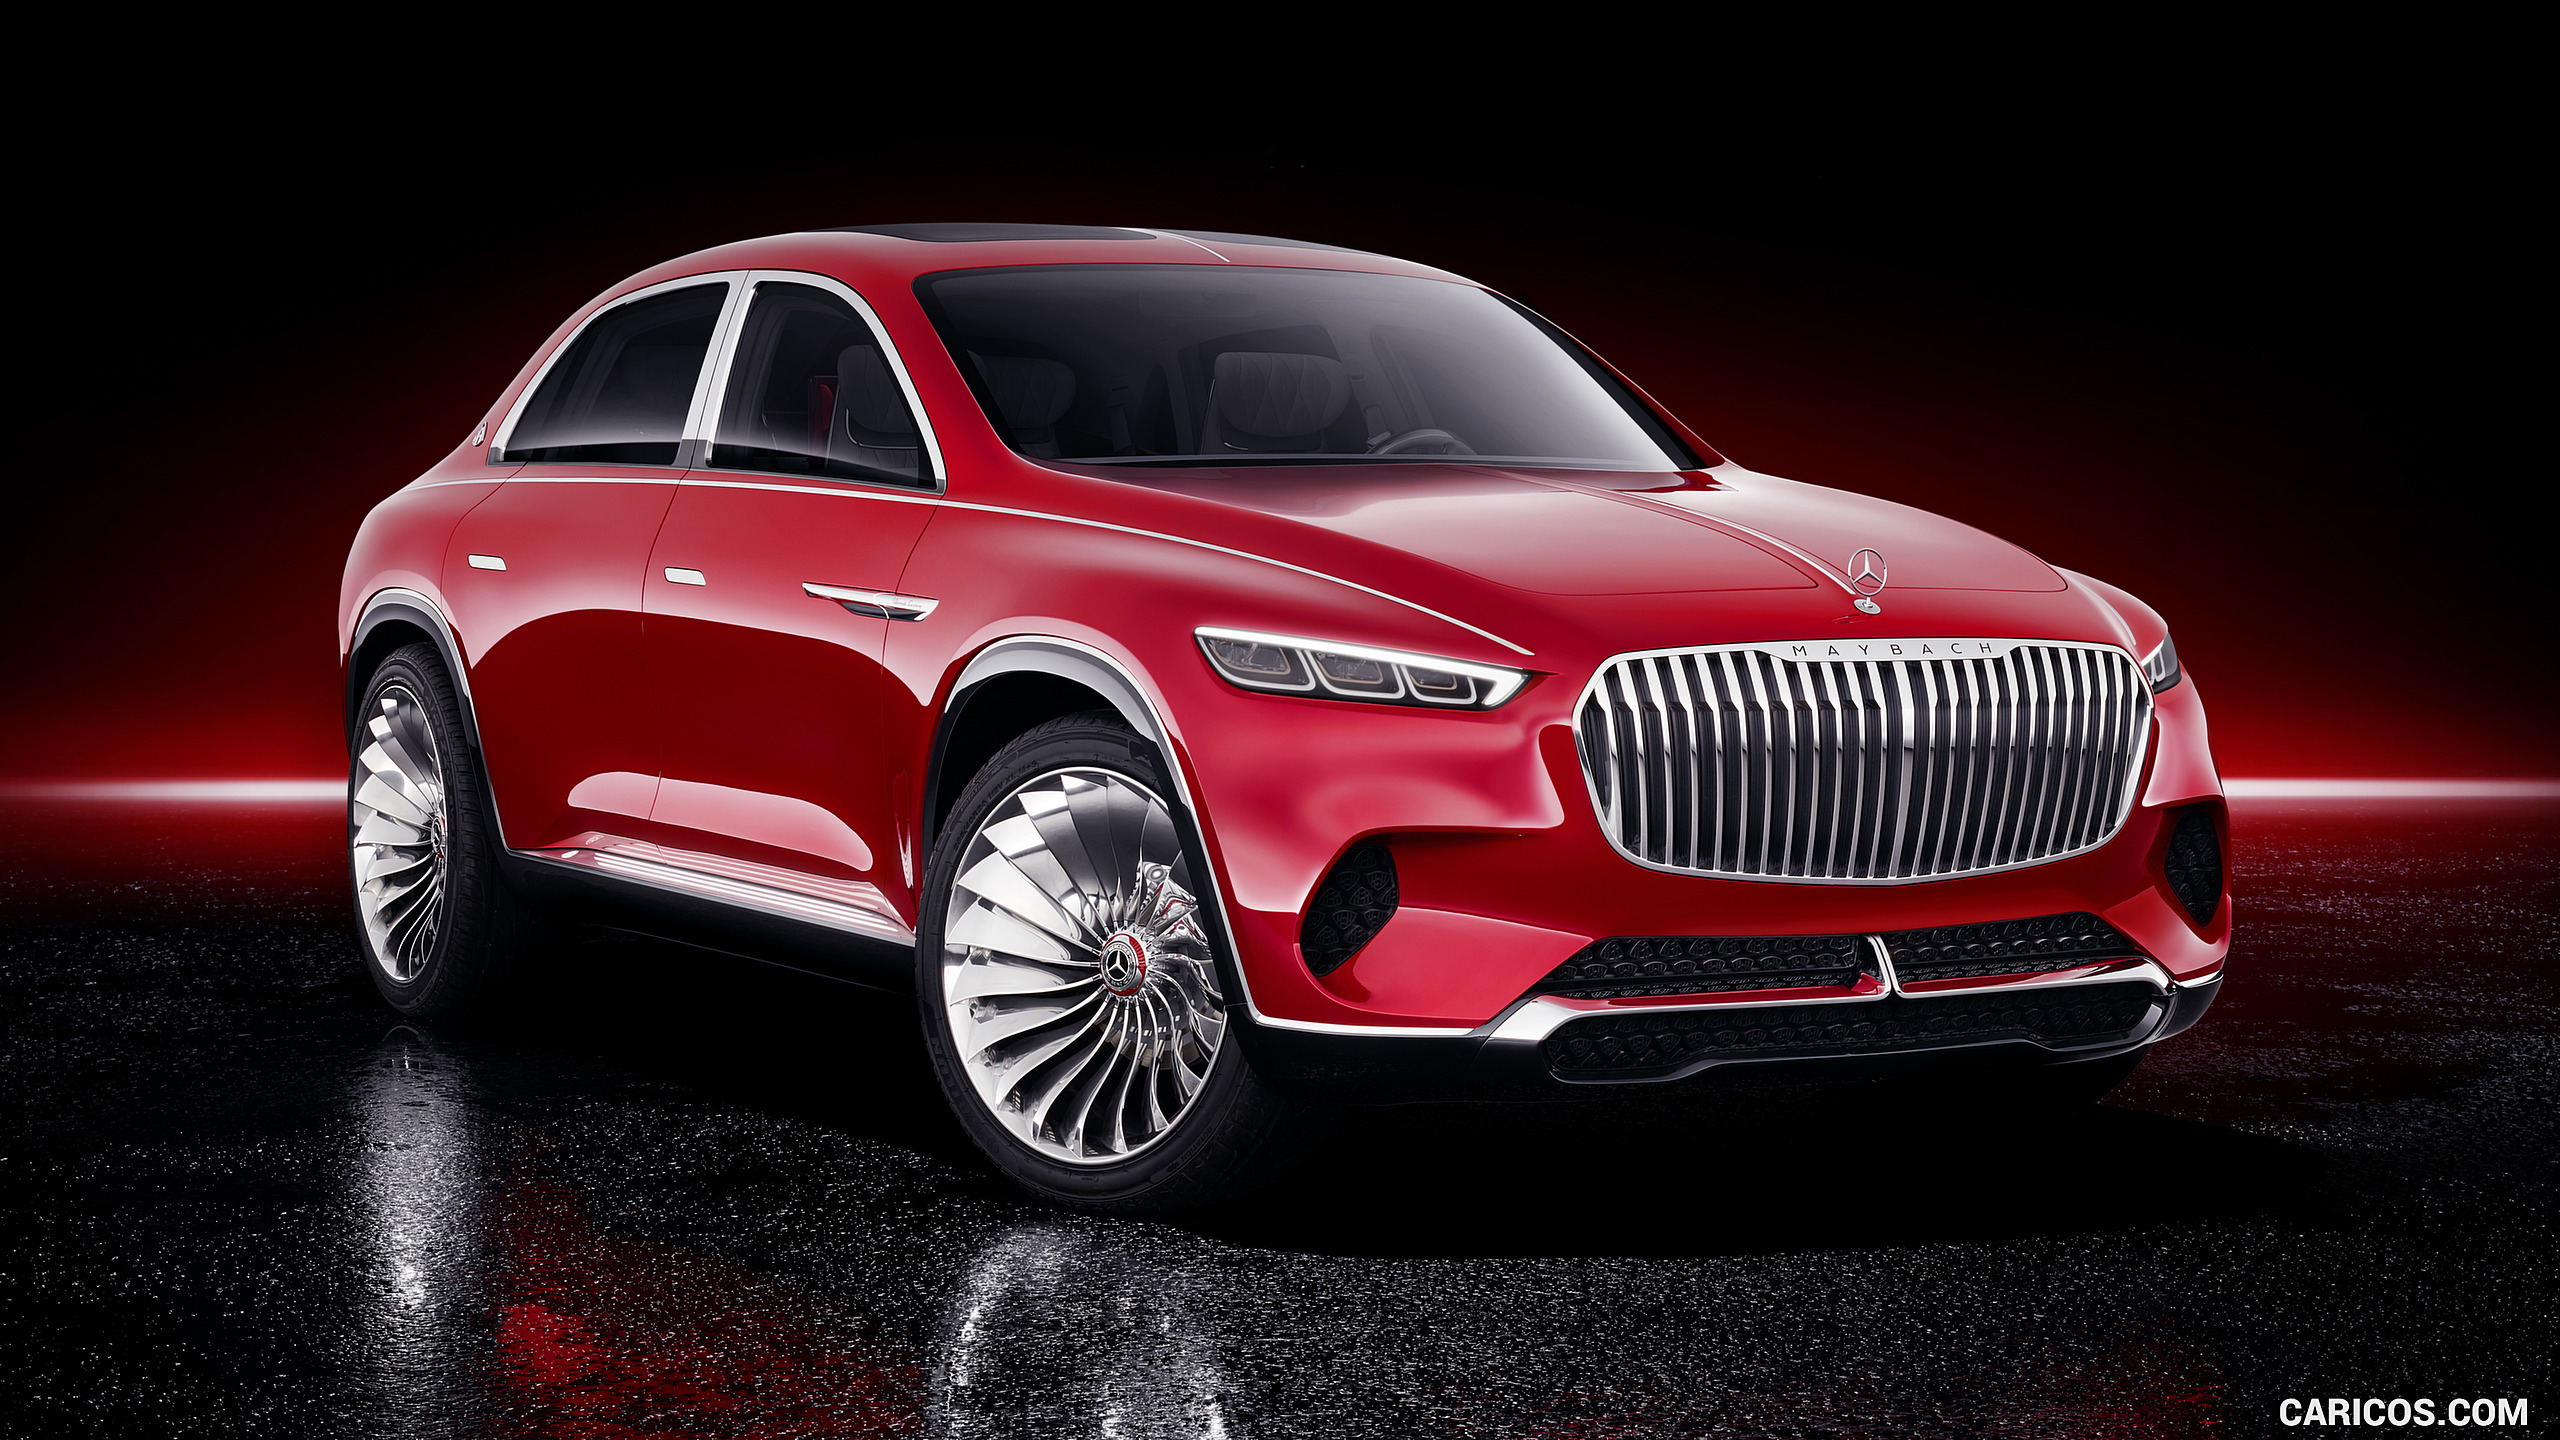 2018 Mercedes-Maybach Vision Ultimate Luxury SUV Concept - Front Three-Quarter, #17 of 41